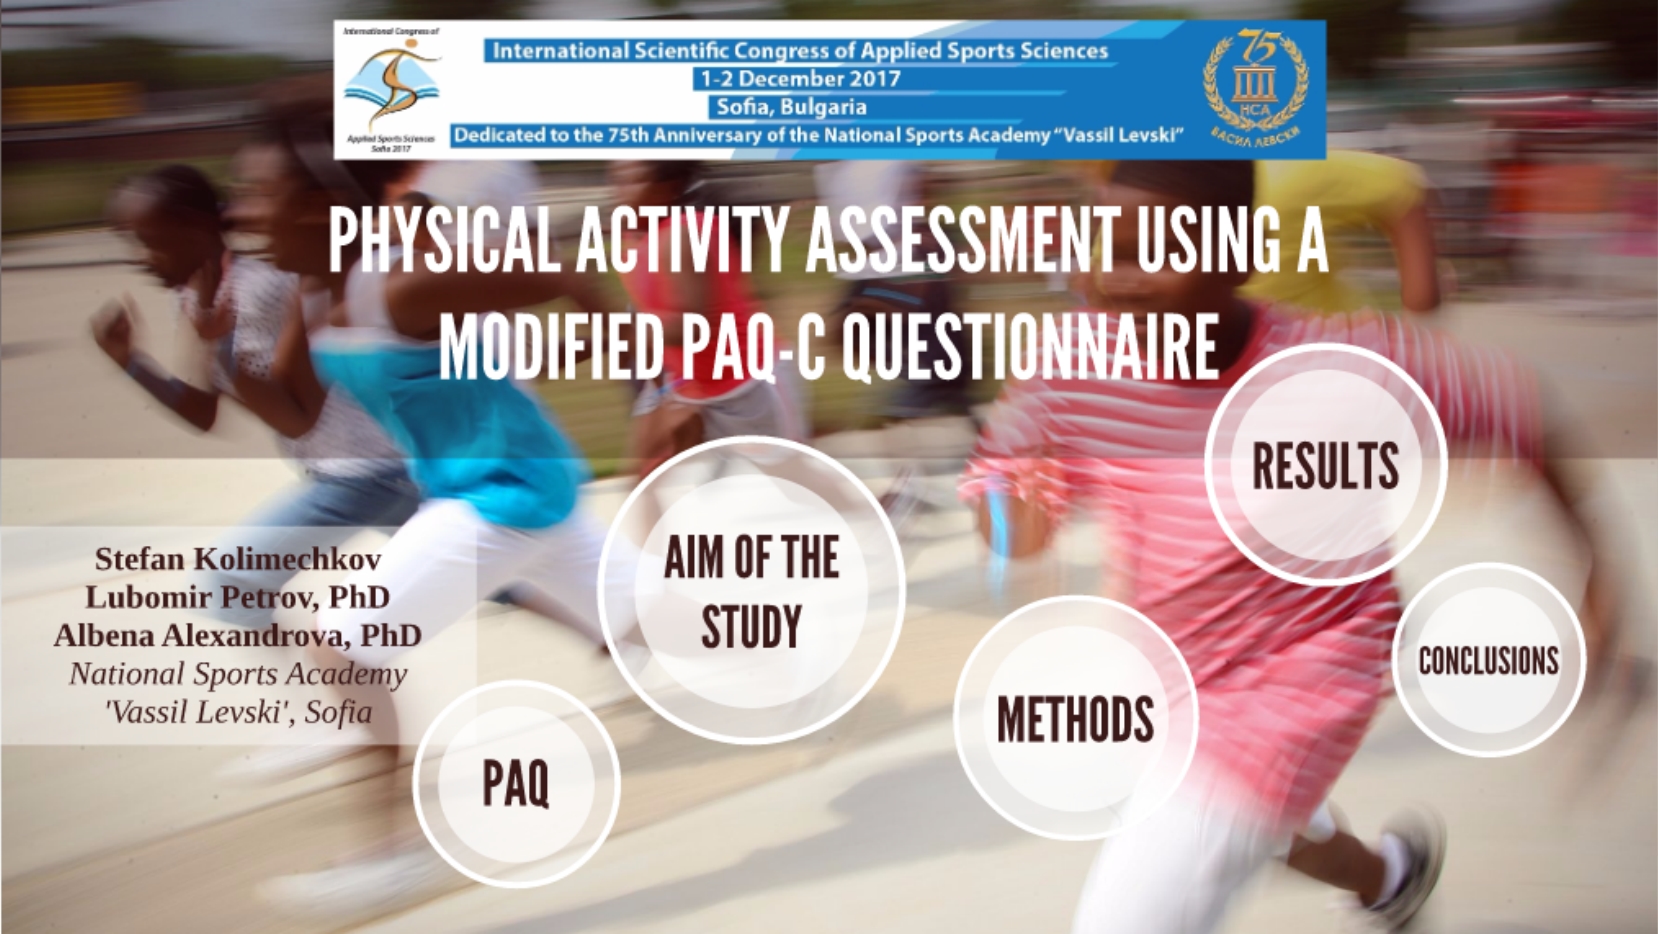 Physical activity assessment using a modified PAQ-C questionnaire at the ICASS Congress in Sofia 2017